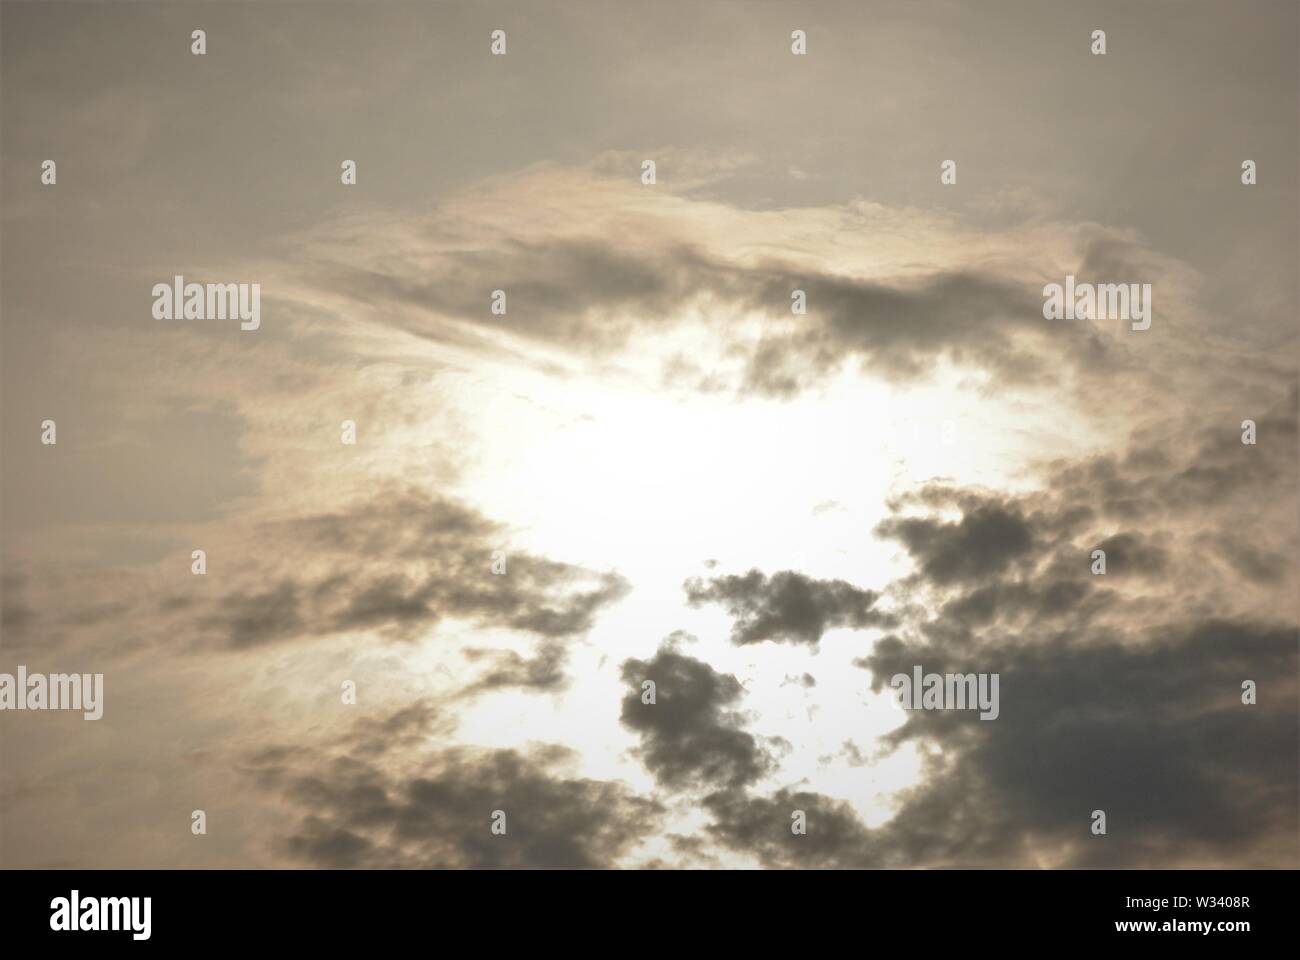 Hazy diffuse sun shining behind  grey clouds in a fuzzy  abstract sky Stock Photo